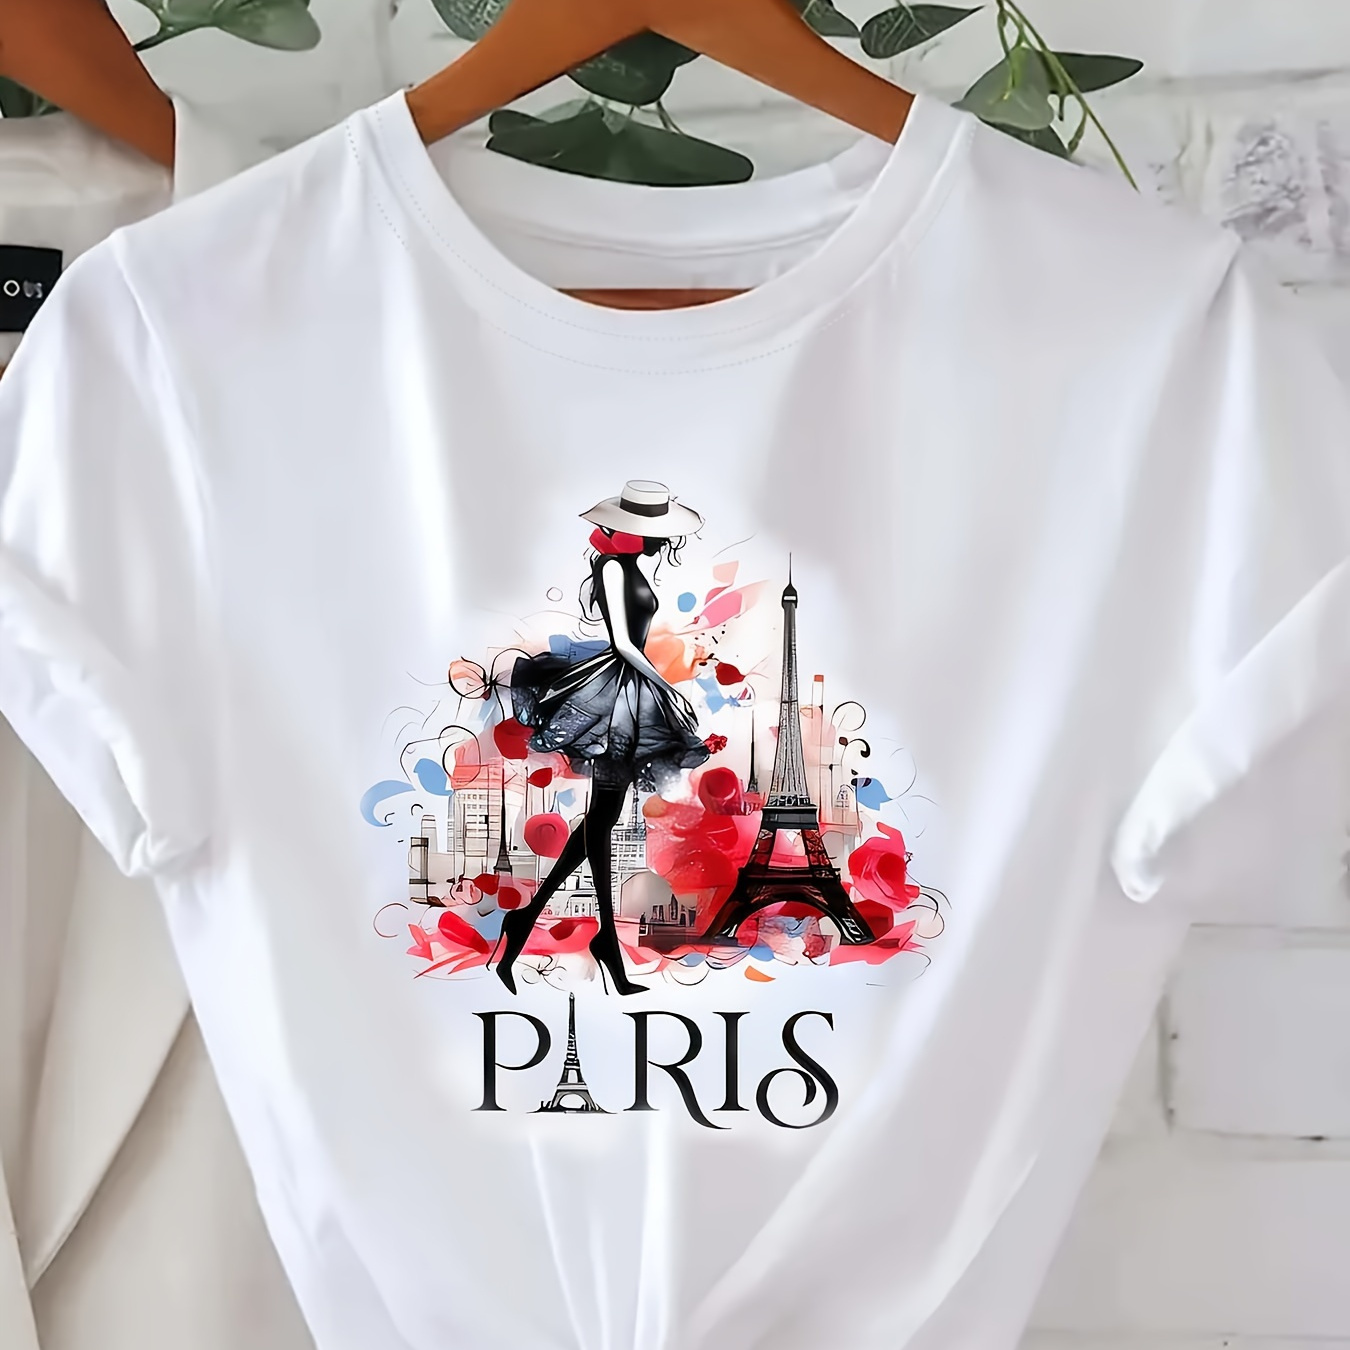 

Paris Print T-shirt, Short Sleeve Crew Neck Casual Top For Summer & Spring, Women's Clothing